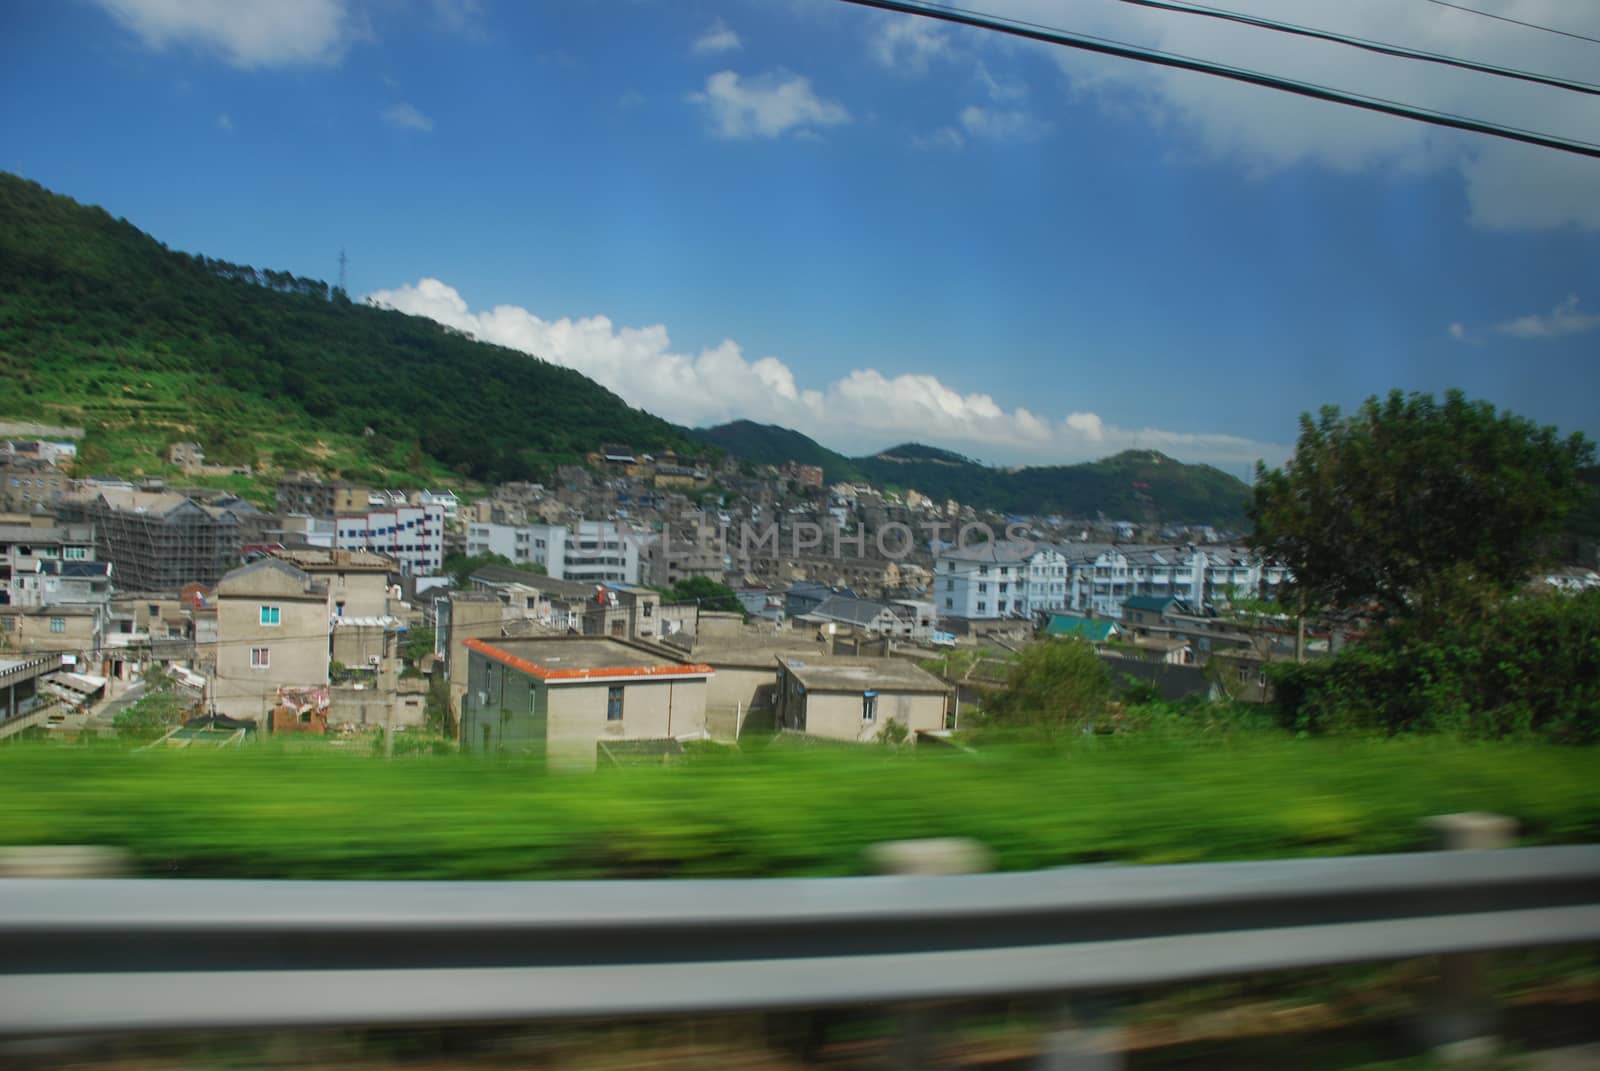 The view from the moving car on the Chinese village